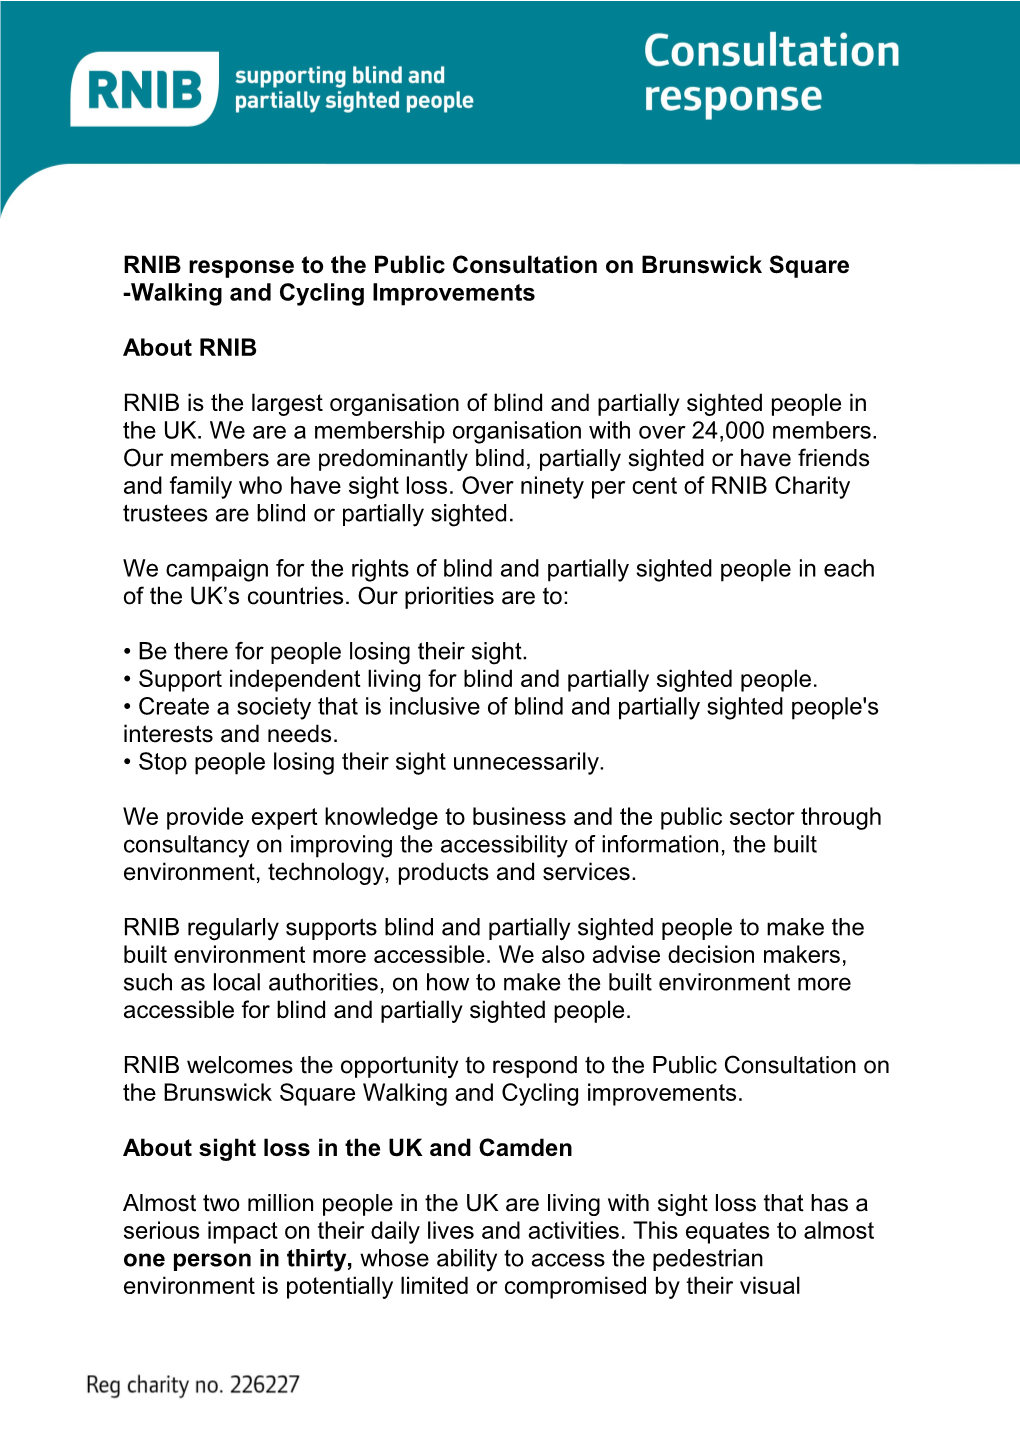 RNIB Response to the Public Consultation on Brunswick Square -Walking and Cycling Improvements